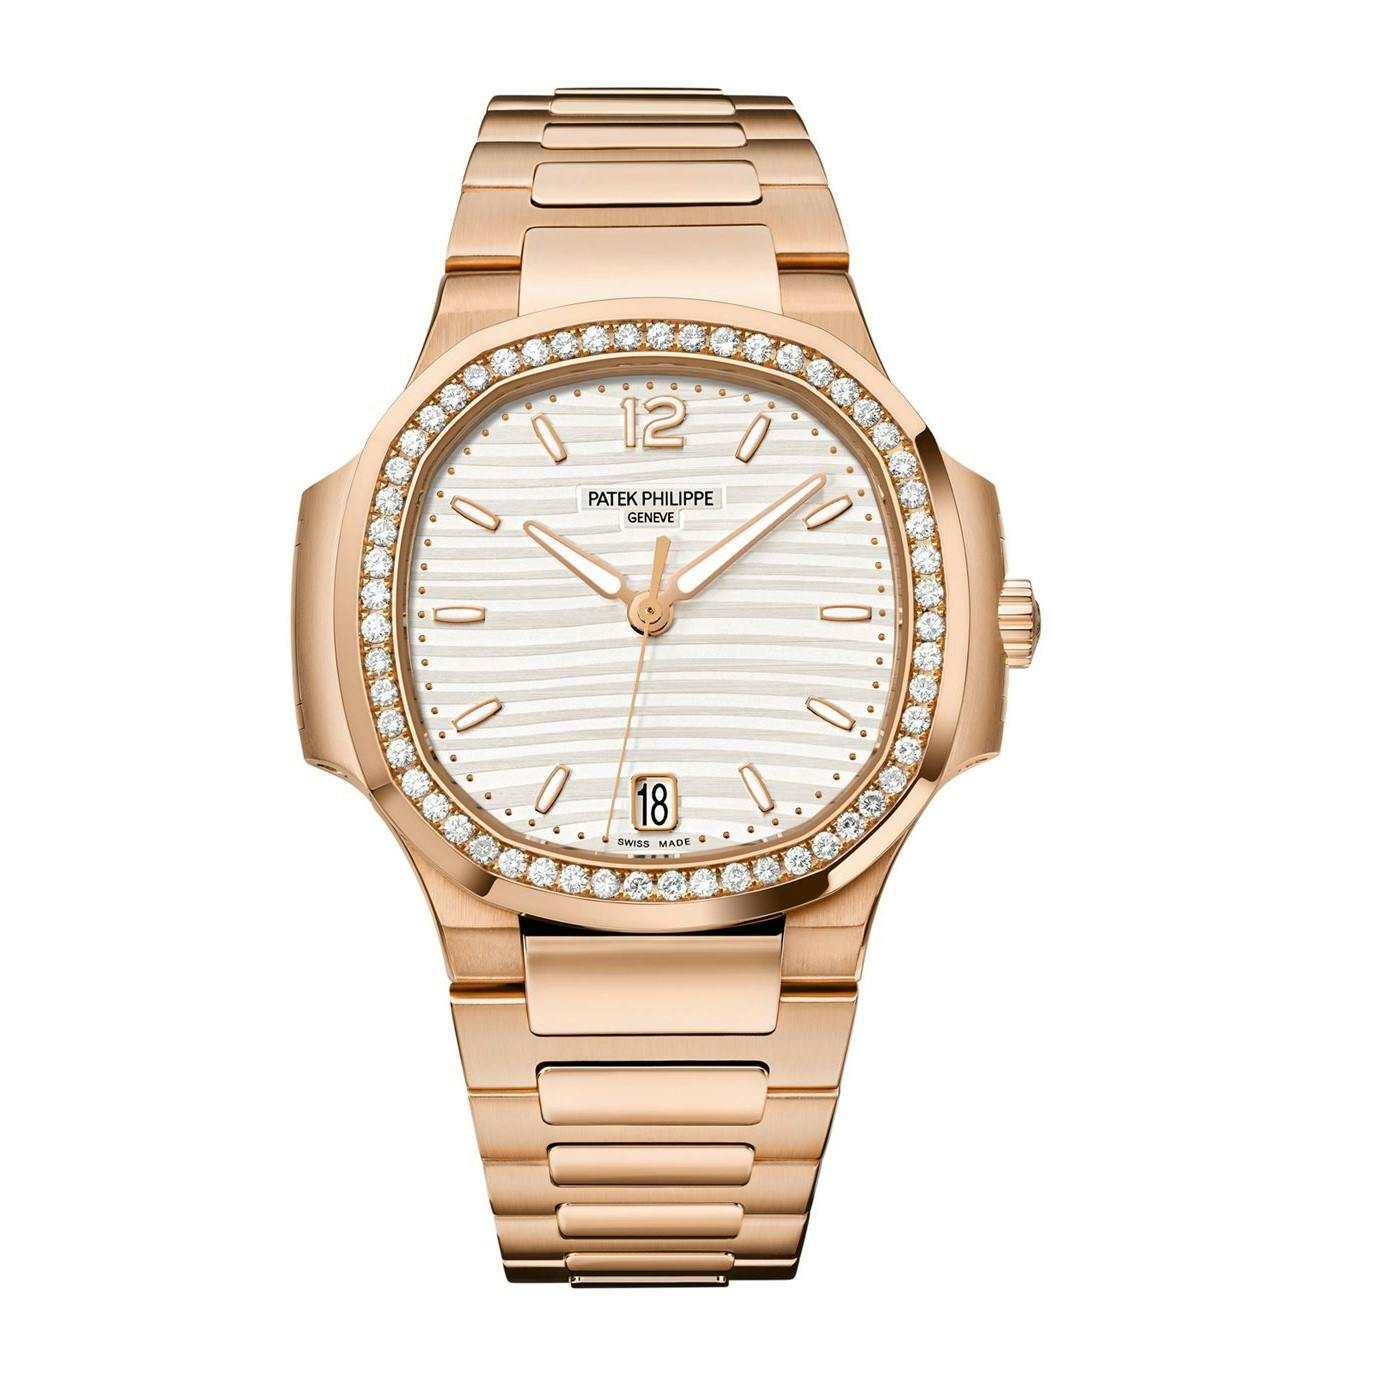 Patek Philippe Nautilus in Rose Gold with Silver Dial and Diamonds (7118/1200R)